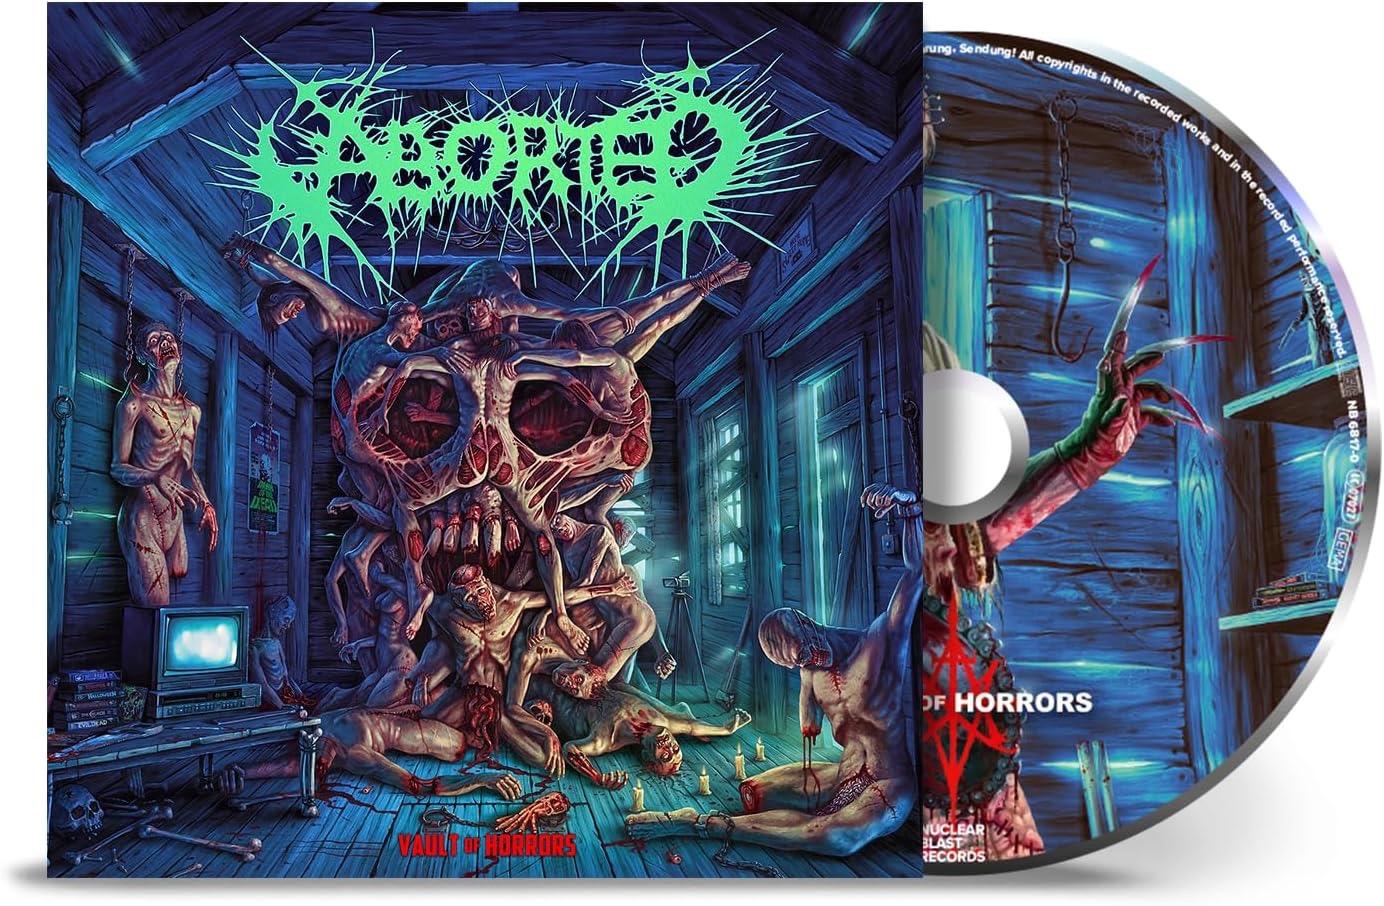 Aborted – Vault Of Horrors Album Review